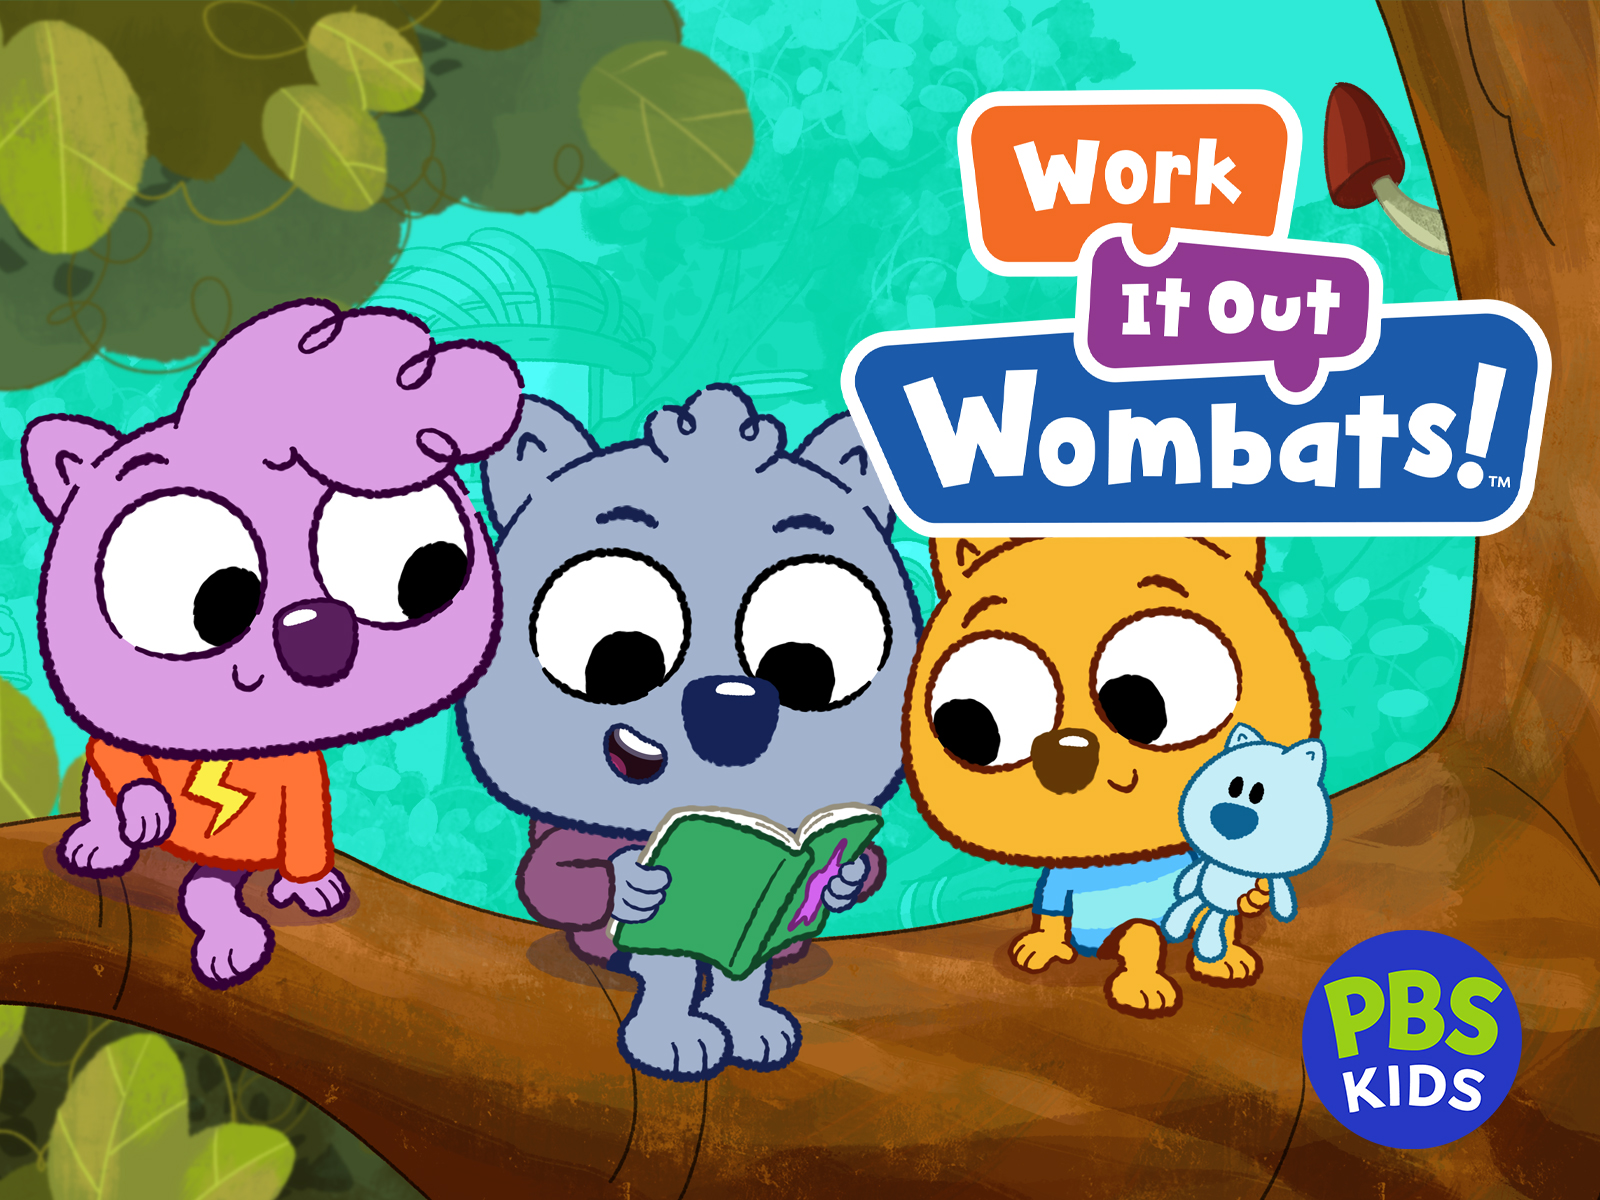 Prime Video: Work It Out Wombats!, Volume 2